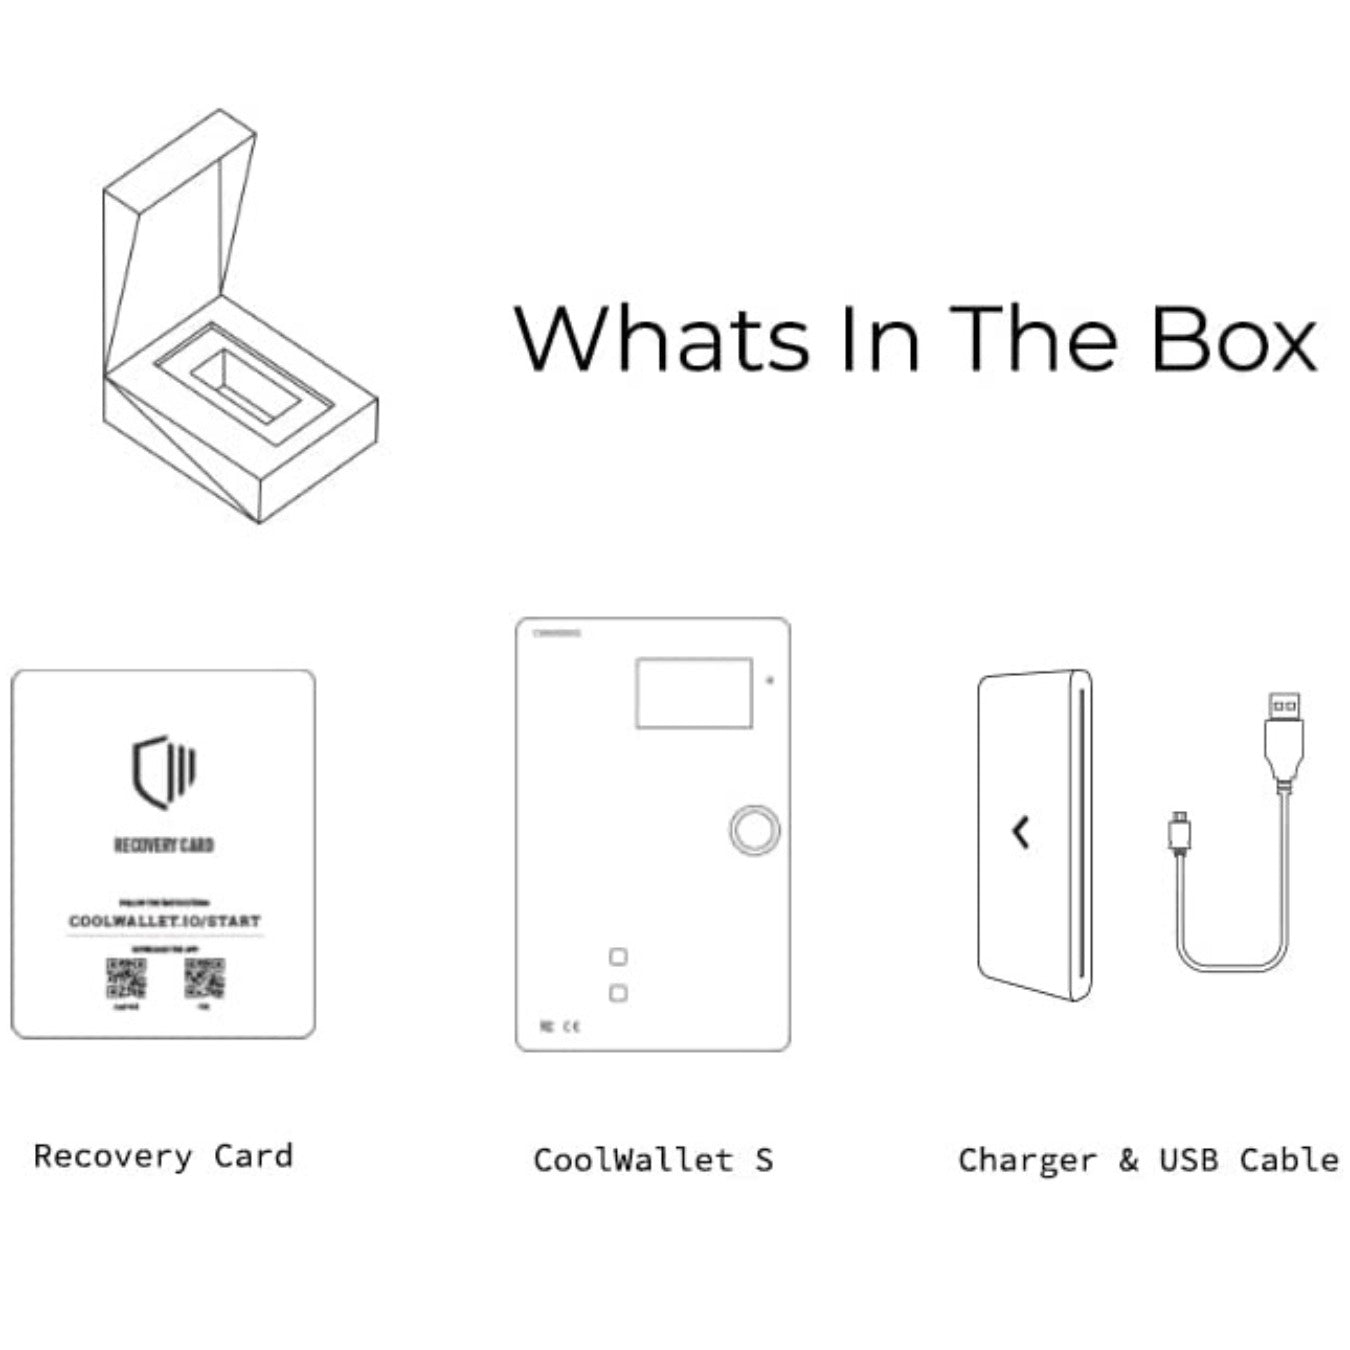 Black and white line drawing illustrating the contents included in the 'What's in the box' package of a CoolWallet S cold wallet.